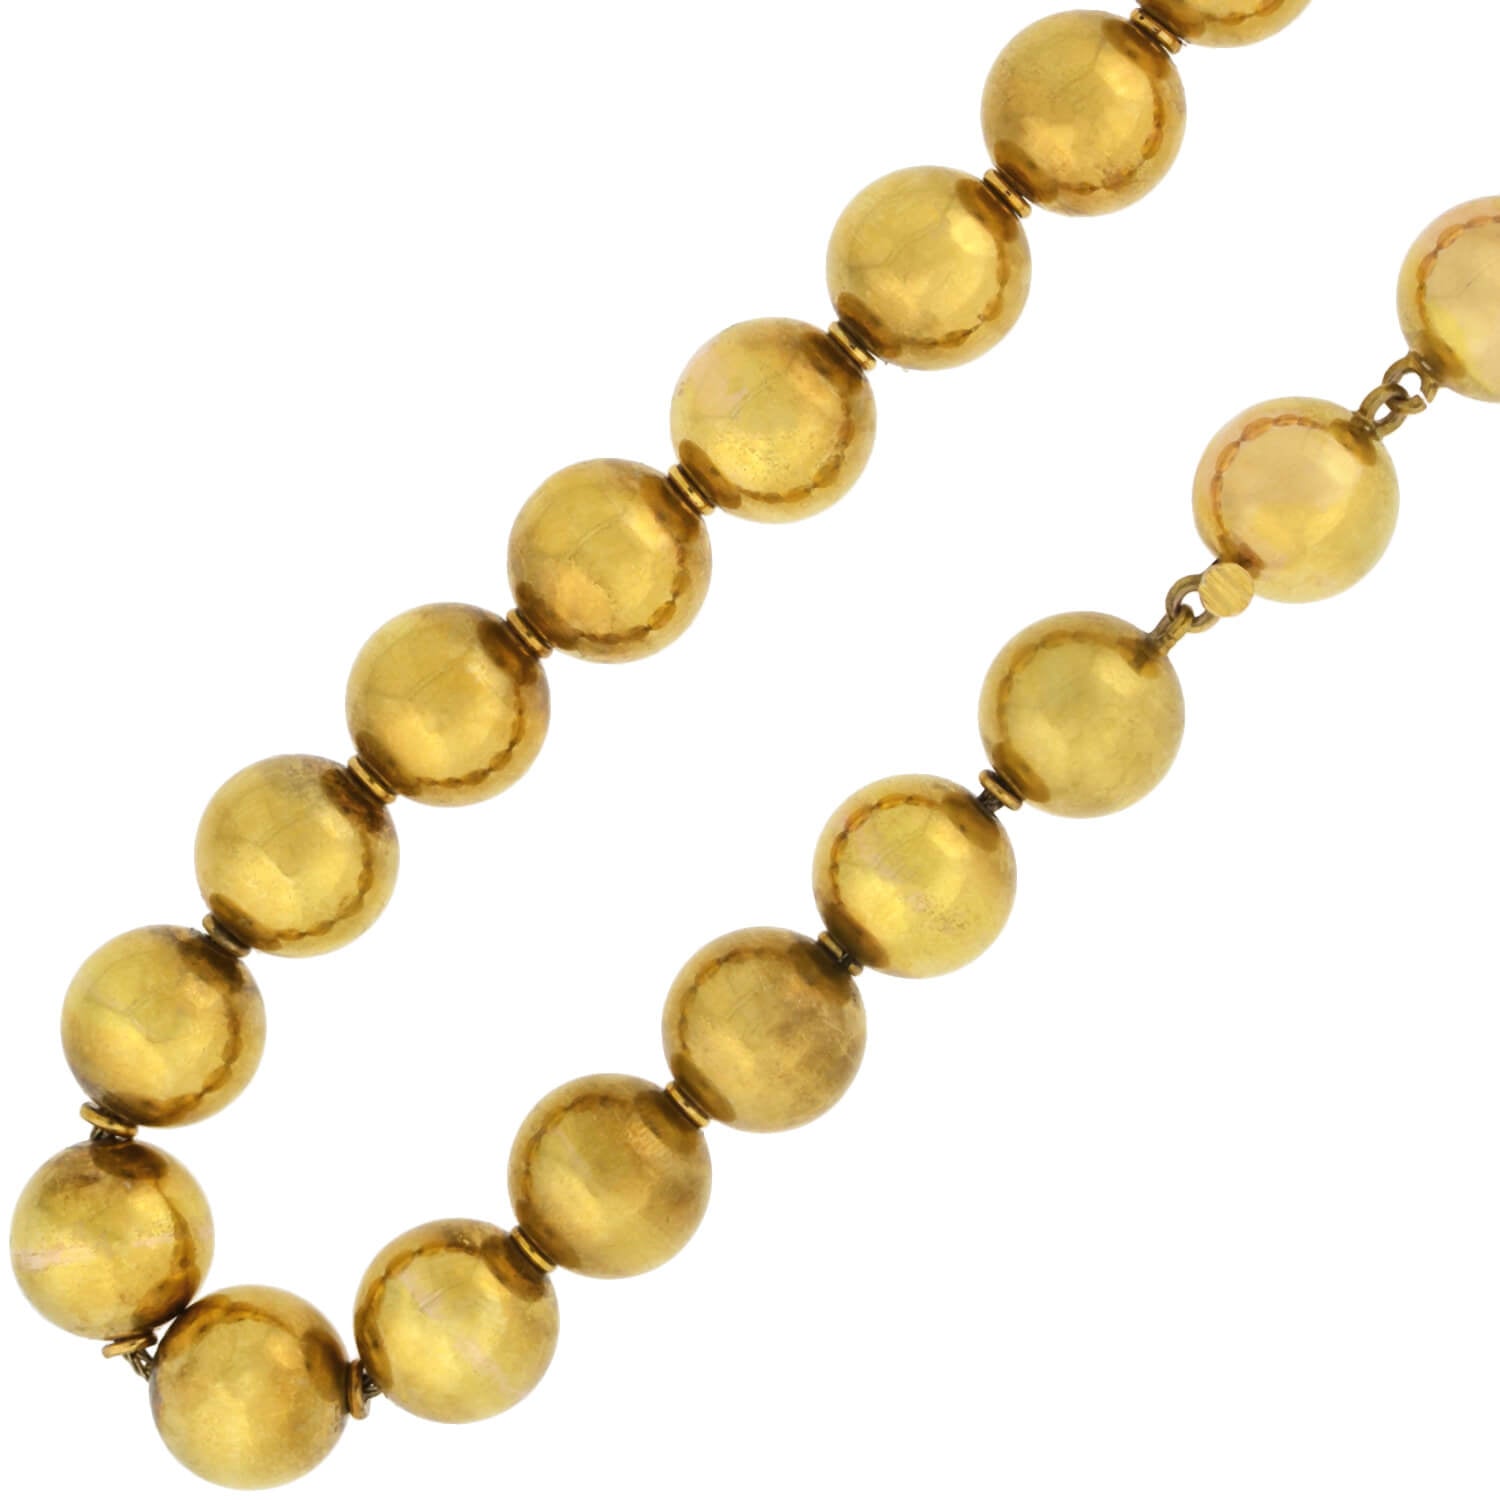 Victorian Rare 15kt Yellow Gold Large Bead Necklace 16.25